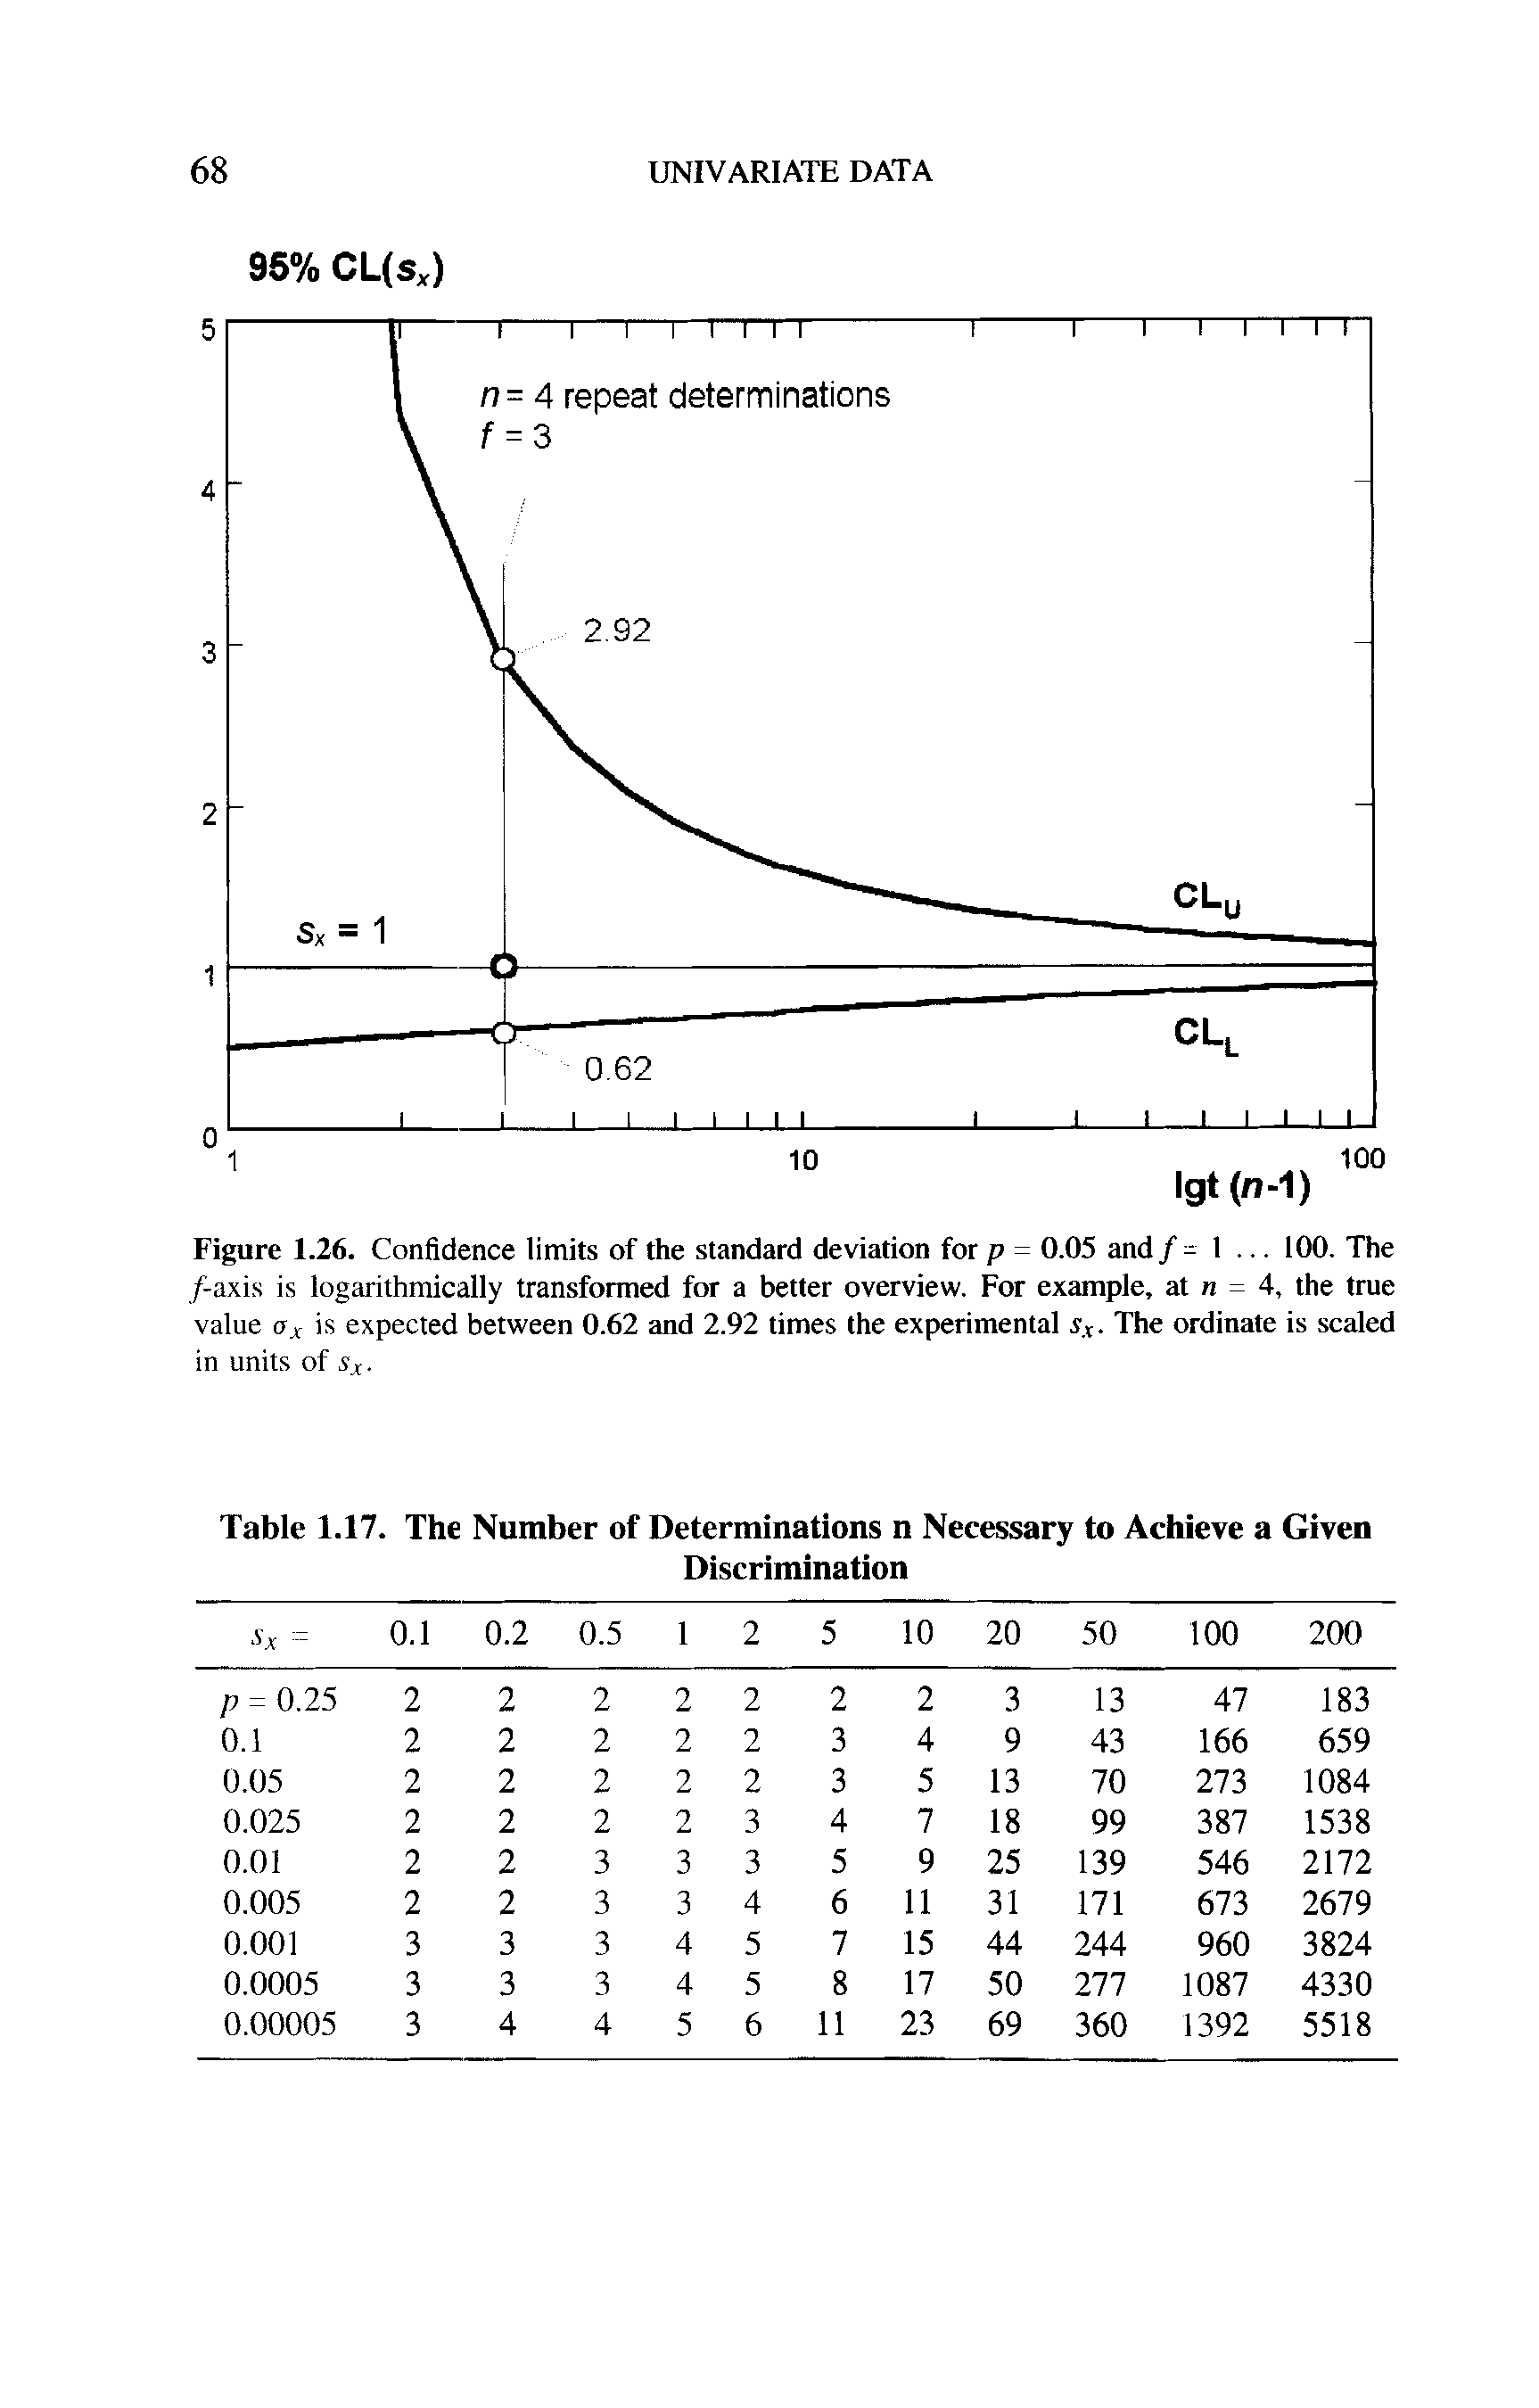 Figure 1.26. Confidence limits of the standard deviation for p = 0.05 and/- 1. .. 100. The /-axis is logarithmically transformed for a better overview. For example, at n = 4, the true value Ox is expected between 0.62 and 2.92 times the experimental Sx. The ordinate is scaled...